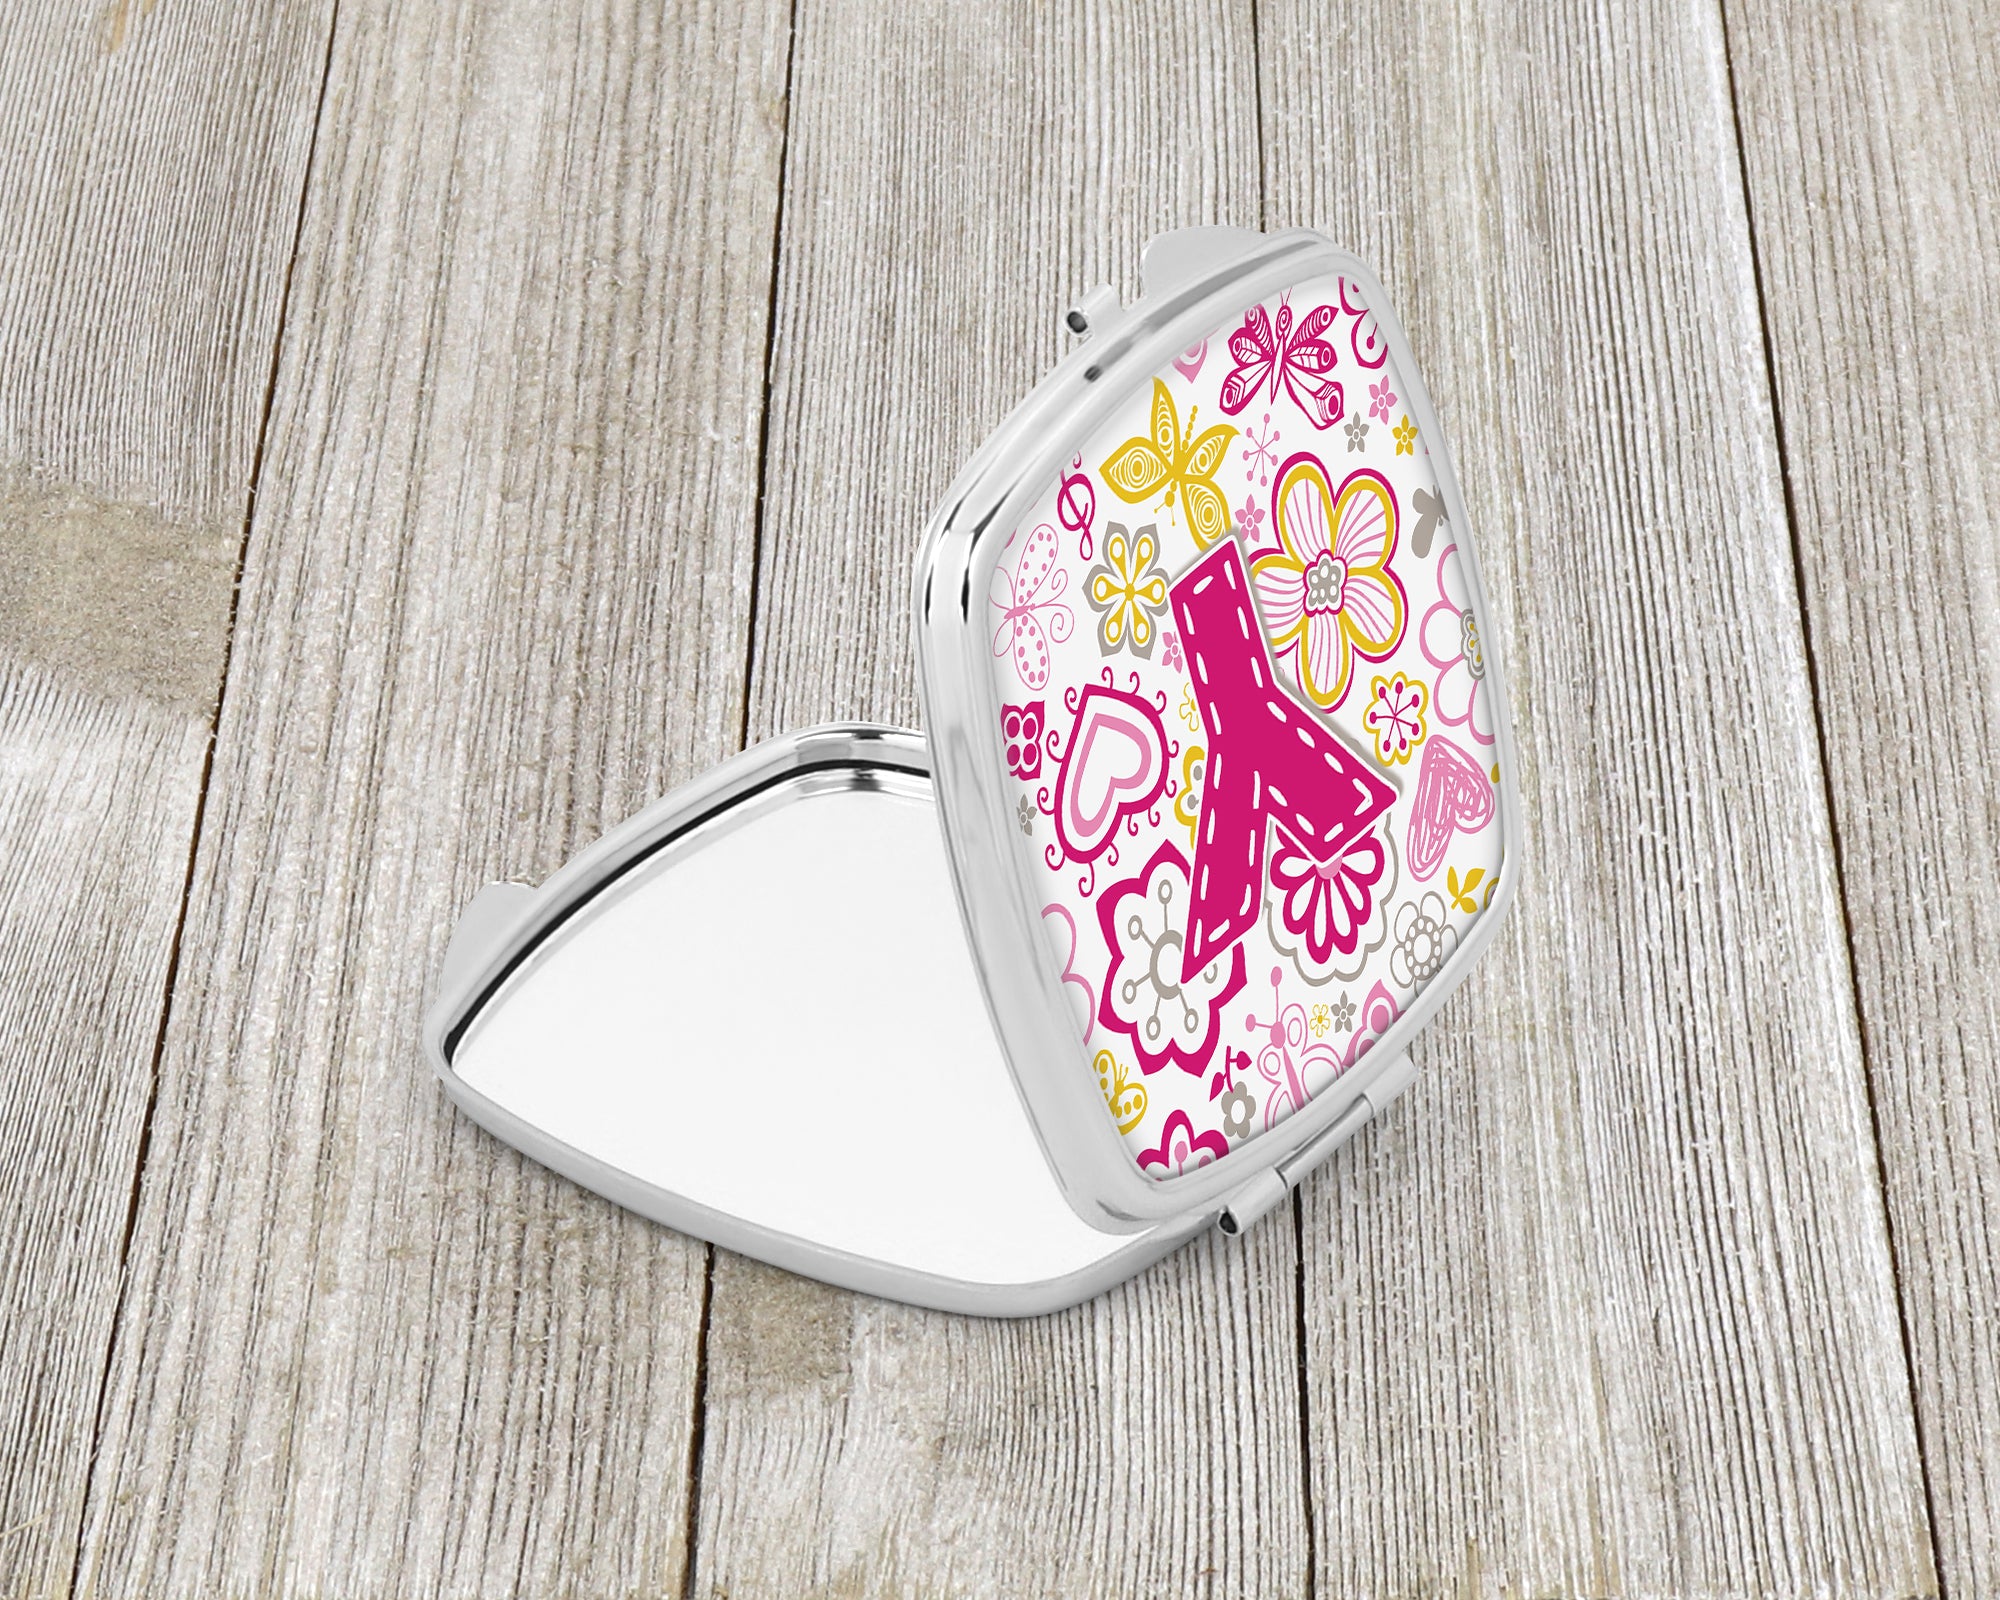 Letter Y Flowers and Butterflies Pink Compact Mirror CJ2005-YSCM